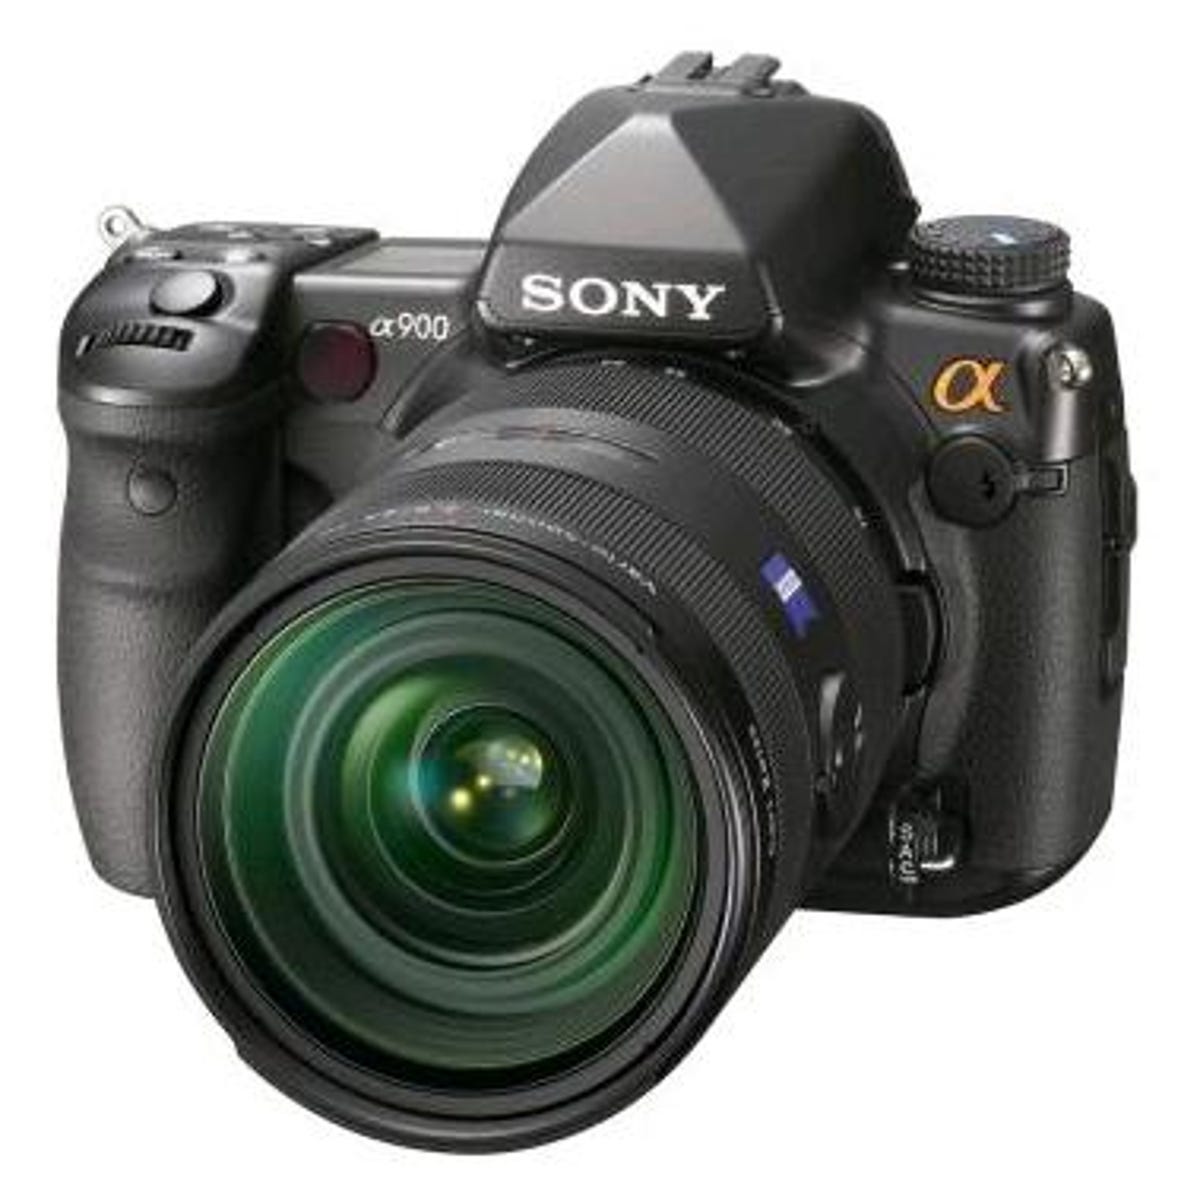 Now supported by Adobe: Sony's new top-end Alpha A900 SLR.